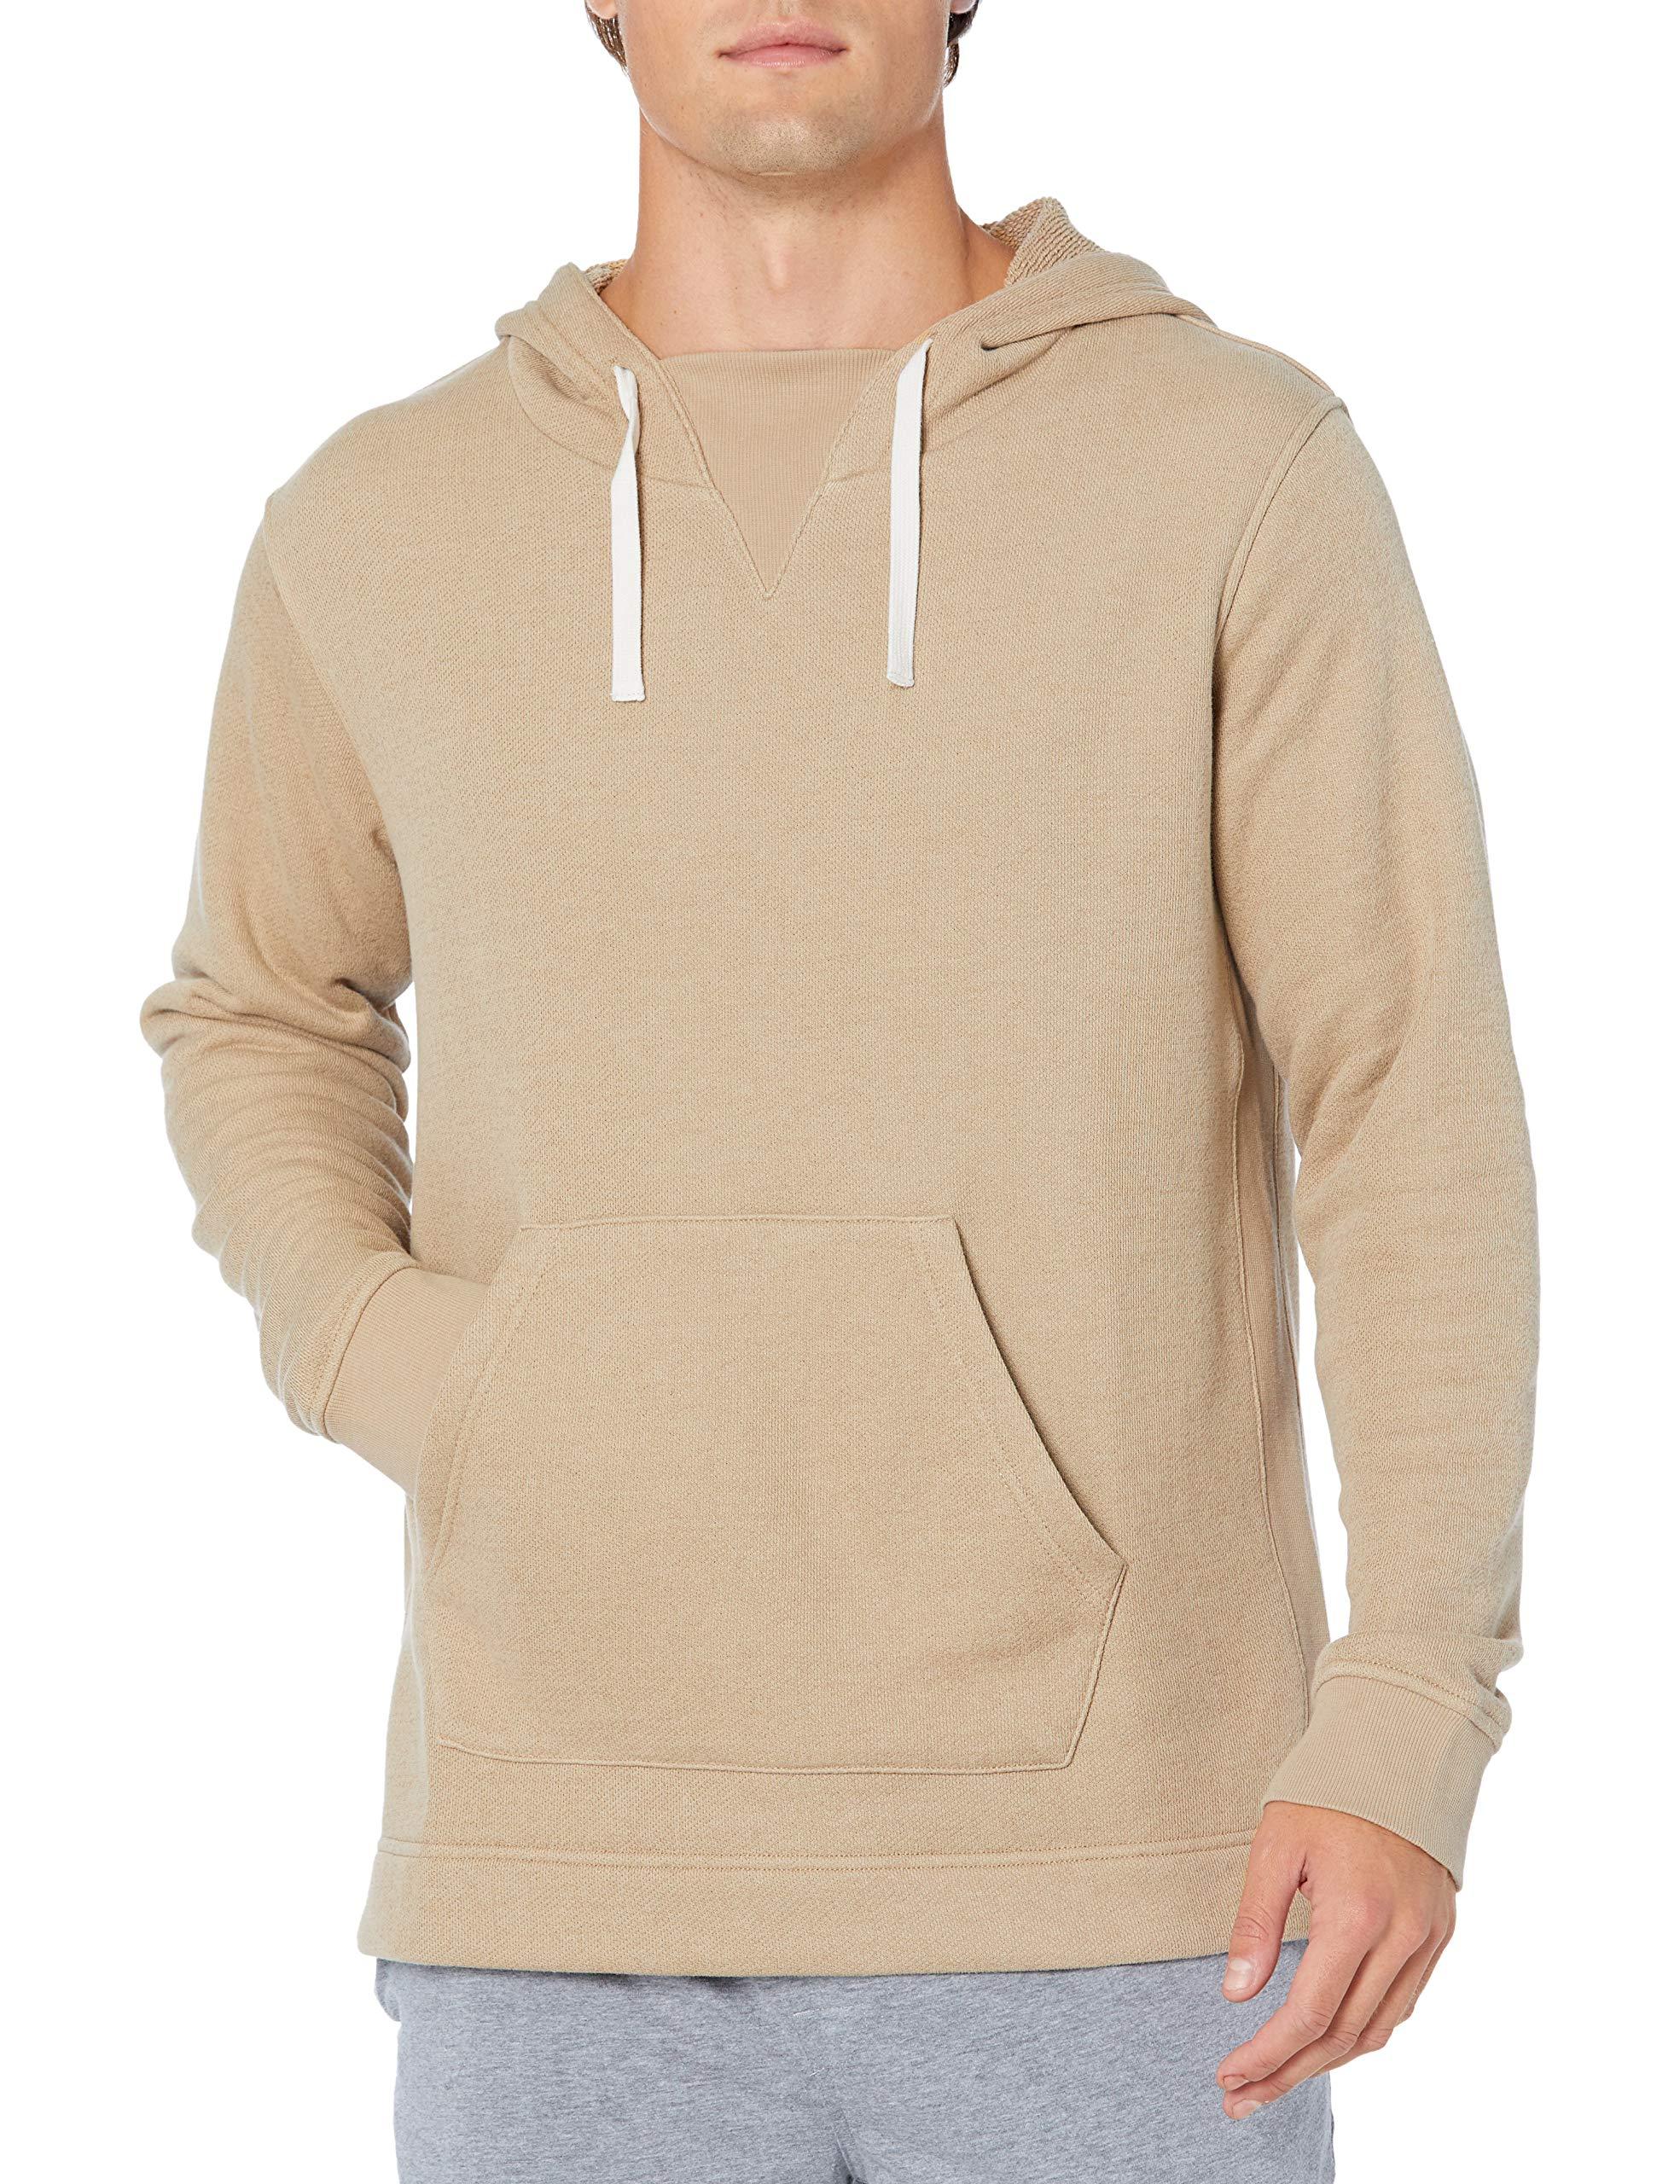 UGG Terrell Pullover Hoodie in Military Sand (Natural) for Men - Lyst